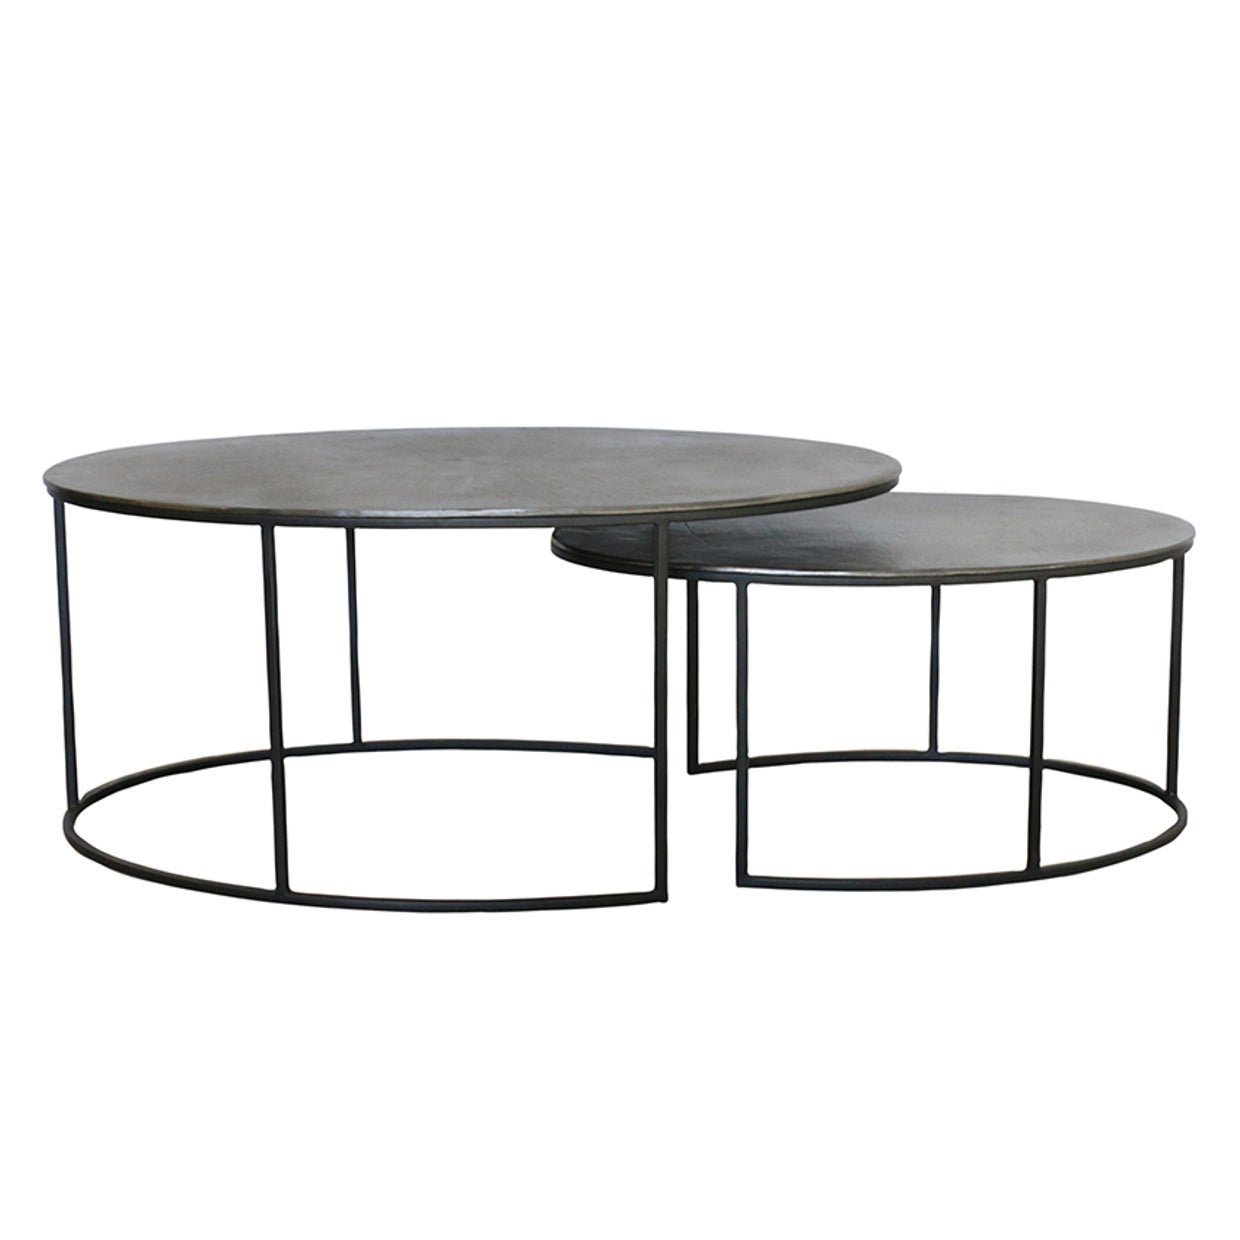 Odessa Nest of 2 Oval Coffee Tables